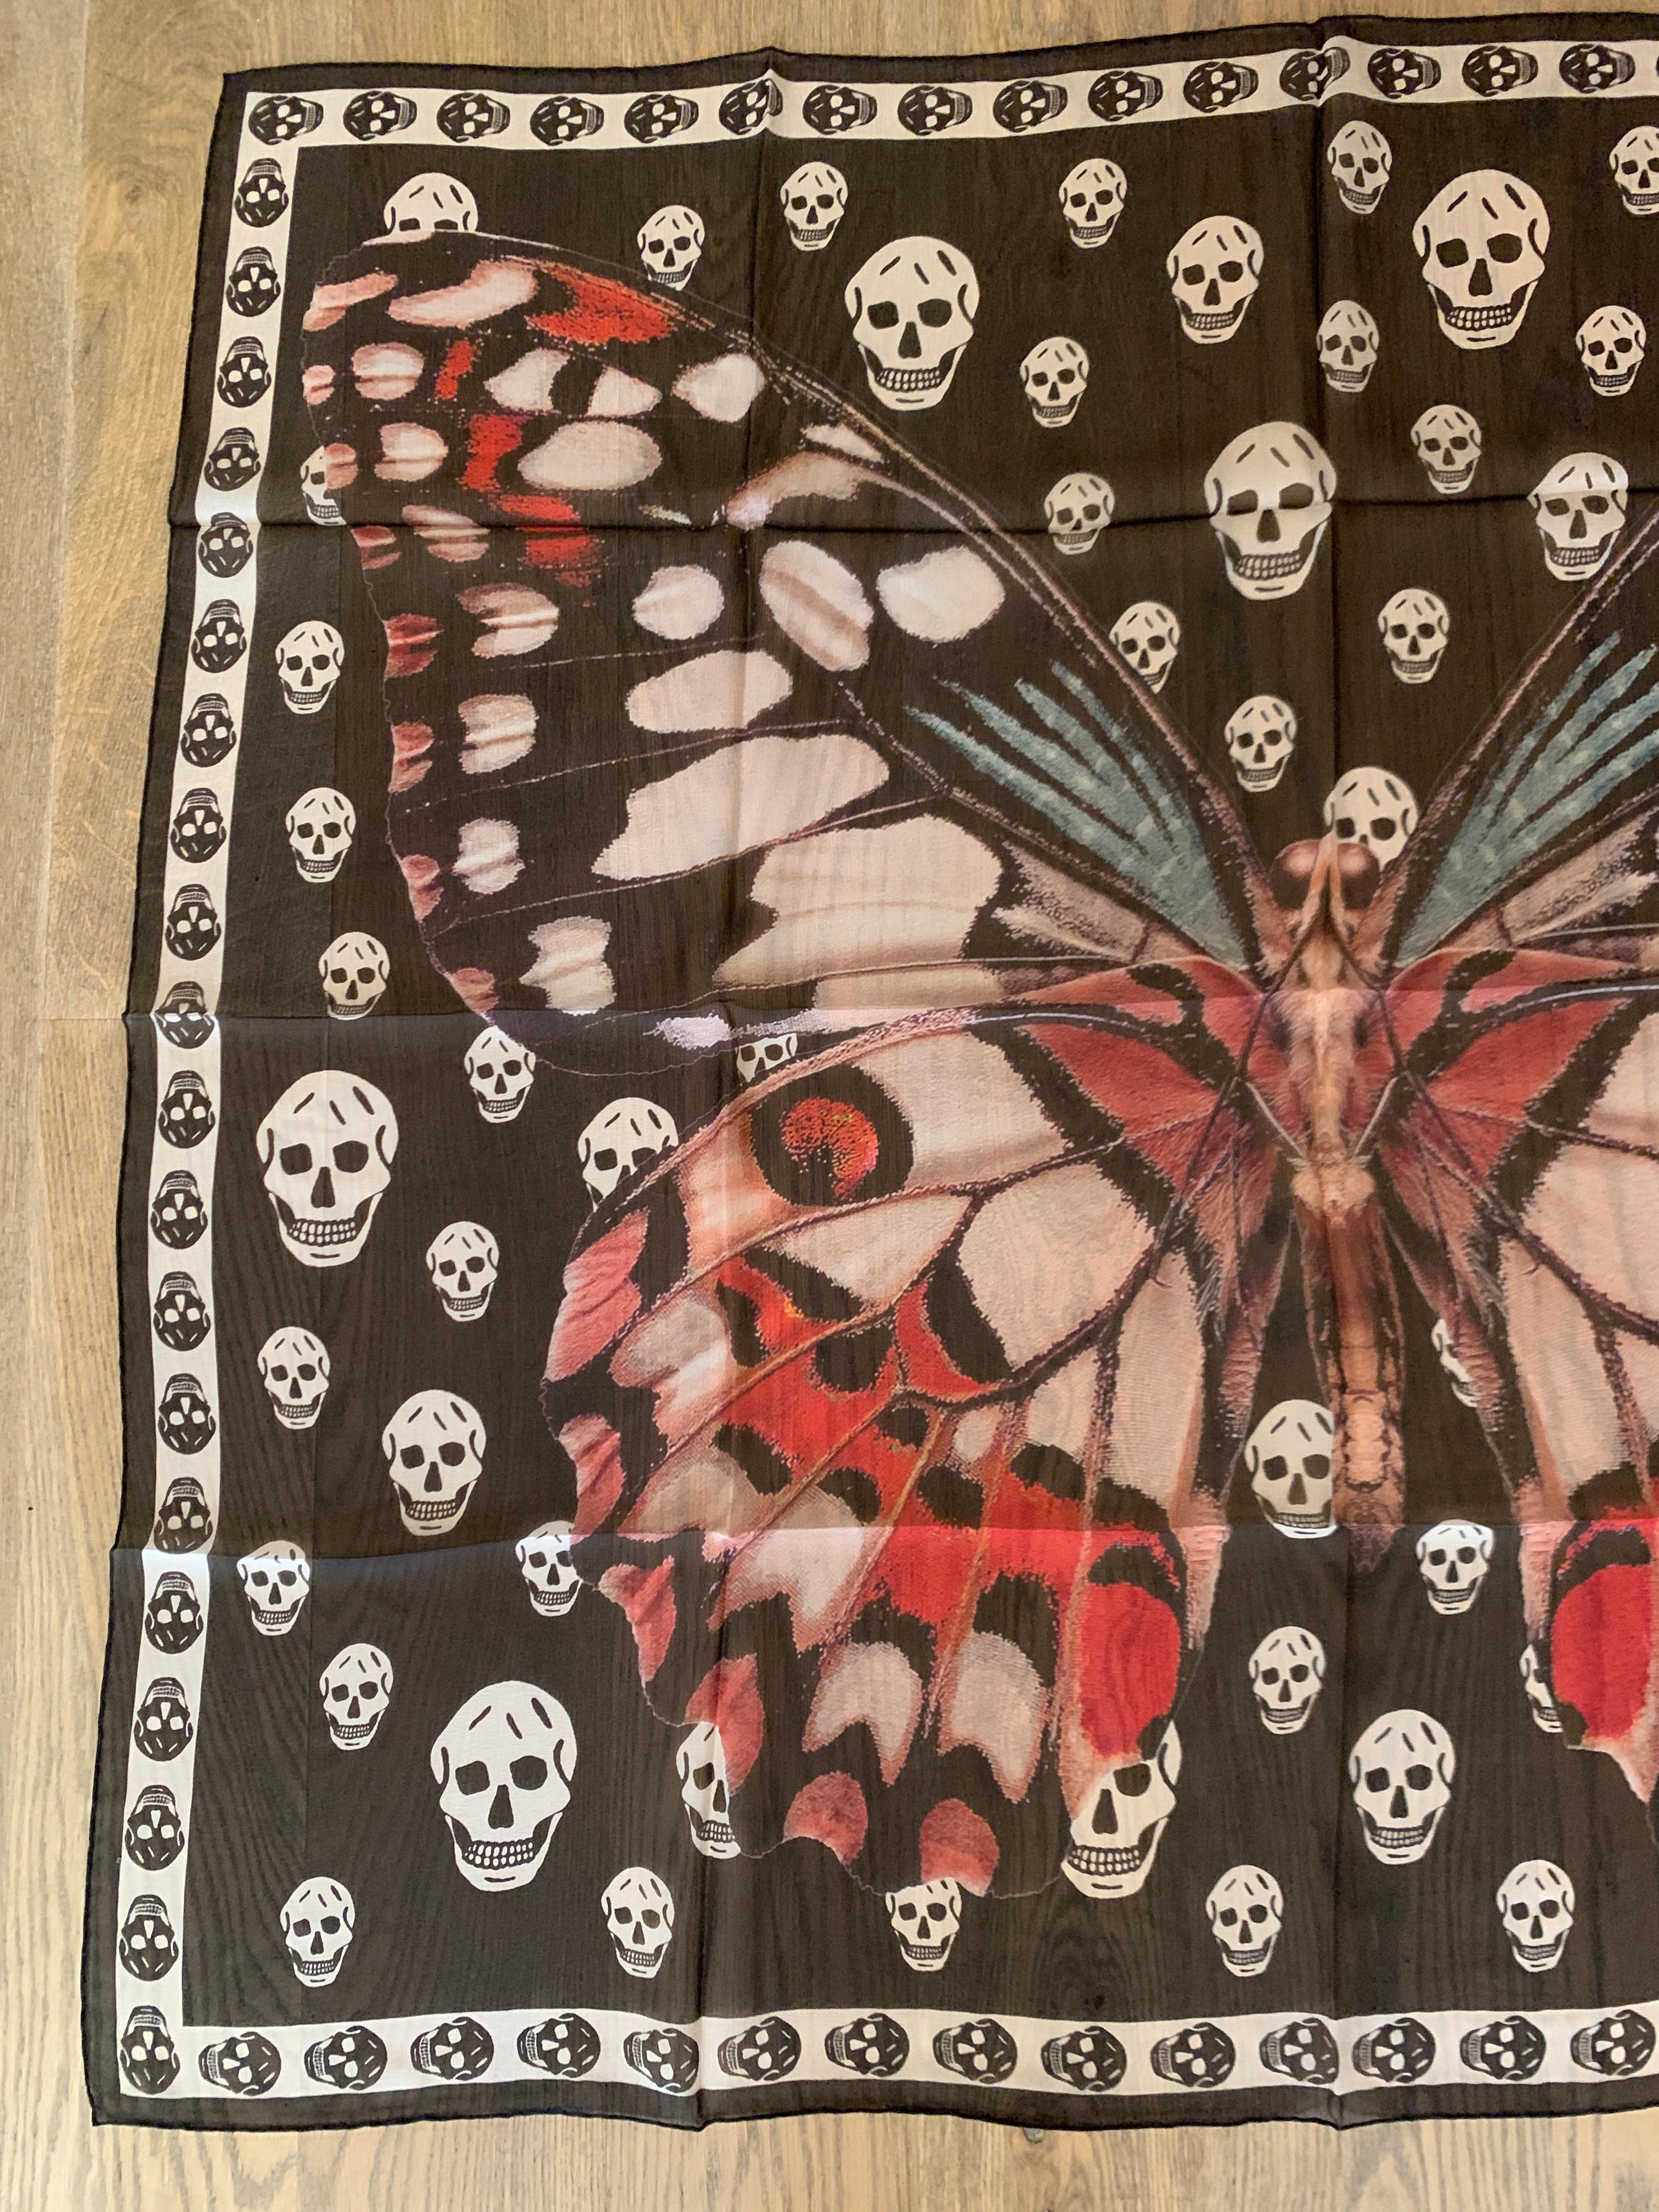 New Alexander McQueen large semi-sheer black scarf featuring giant butterfly or moth with black skulls print throughout background. Signed Alexander McQueen in logo at bottom corner. 

Purchased directly from McQueen store.

100%